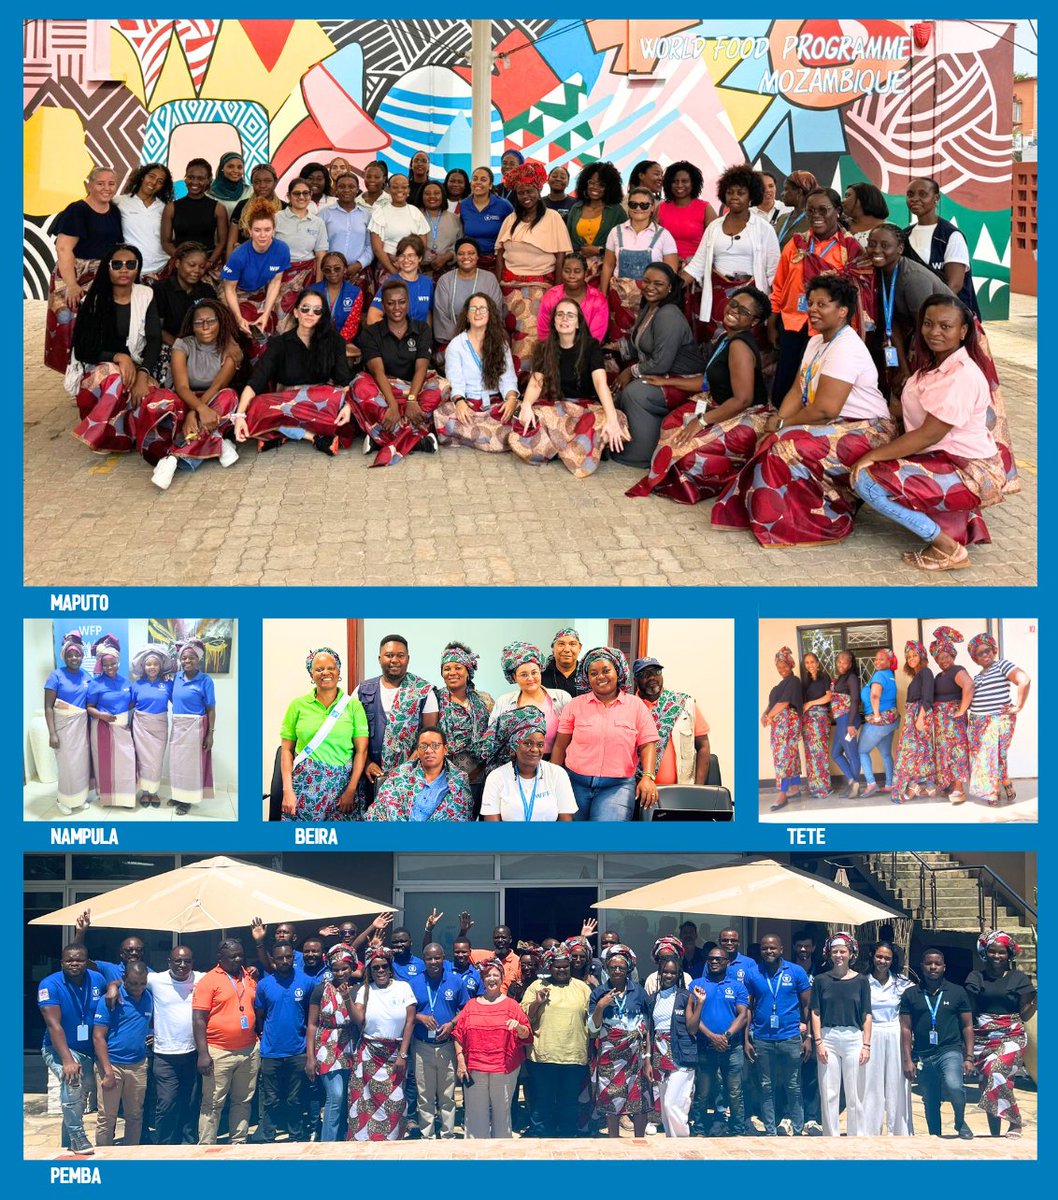 Ahead of 7 April, national Mozambican #Woman's Day, @WFP #Mozambique's HR team organized a celebration to recognize all women staff for their outstanding dedication, commitment and hard work to contribute to the empowerment of all women and girls. ♀️🇲🇿👩🏾‍🦱👩🏿‍🦱👩🏼‍🦱👩🏽‍🦱 Estamos juntas! ✊🏿